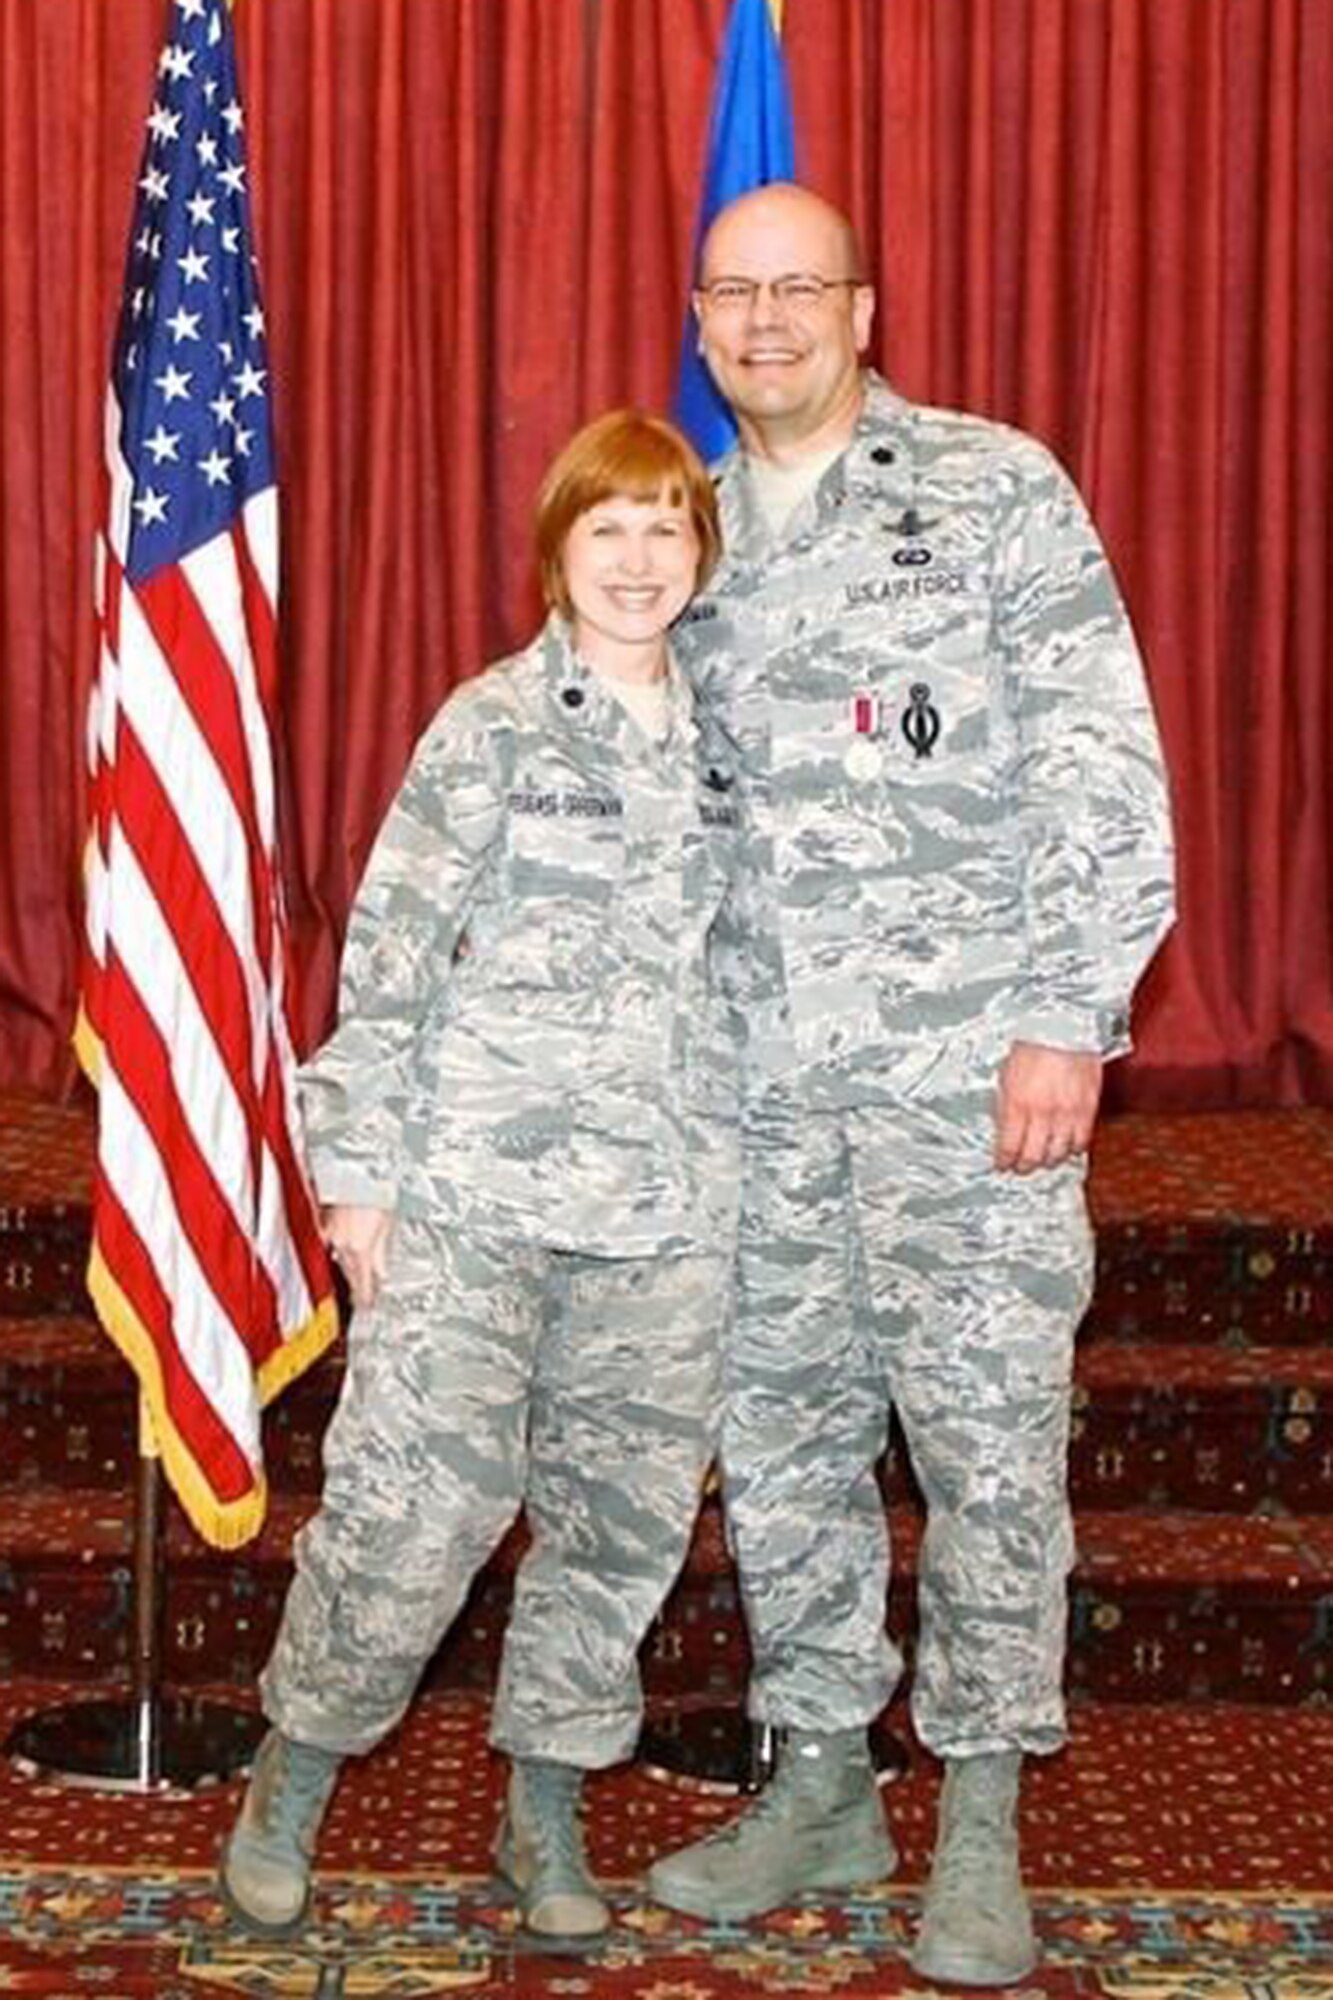 Don Opperman, a U.S. Air Force veteran, right, and his wife, now Col. Anita Feugate Opperman, 341st Missile Wing commander, pose for a photo. (Courtesy photo)